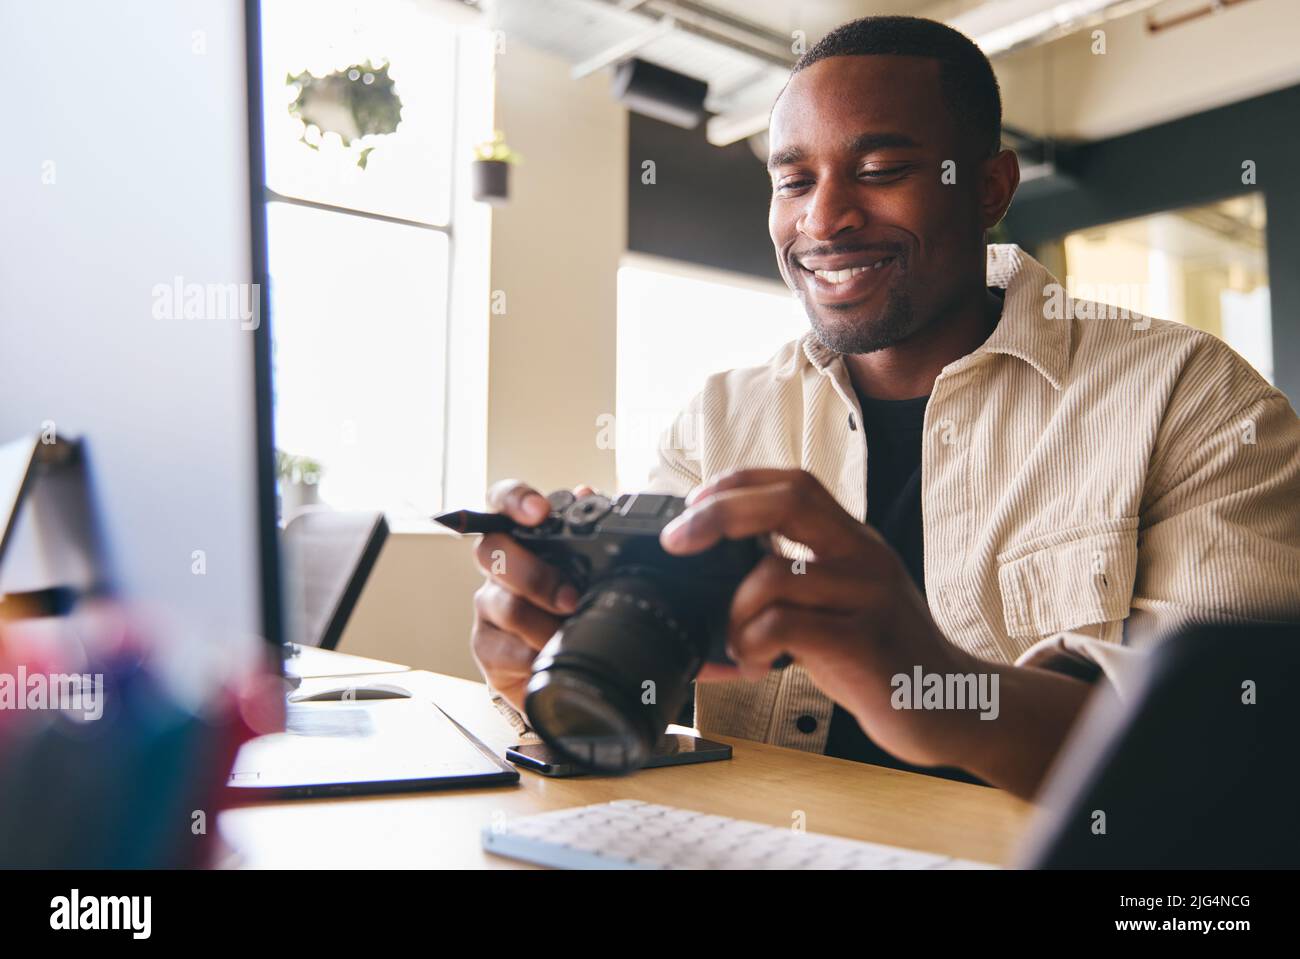 Young Black Professional Photographer Sitting At Desk Working On Computer Holding Camera Editing Pictures Stock Photo